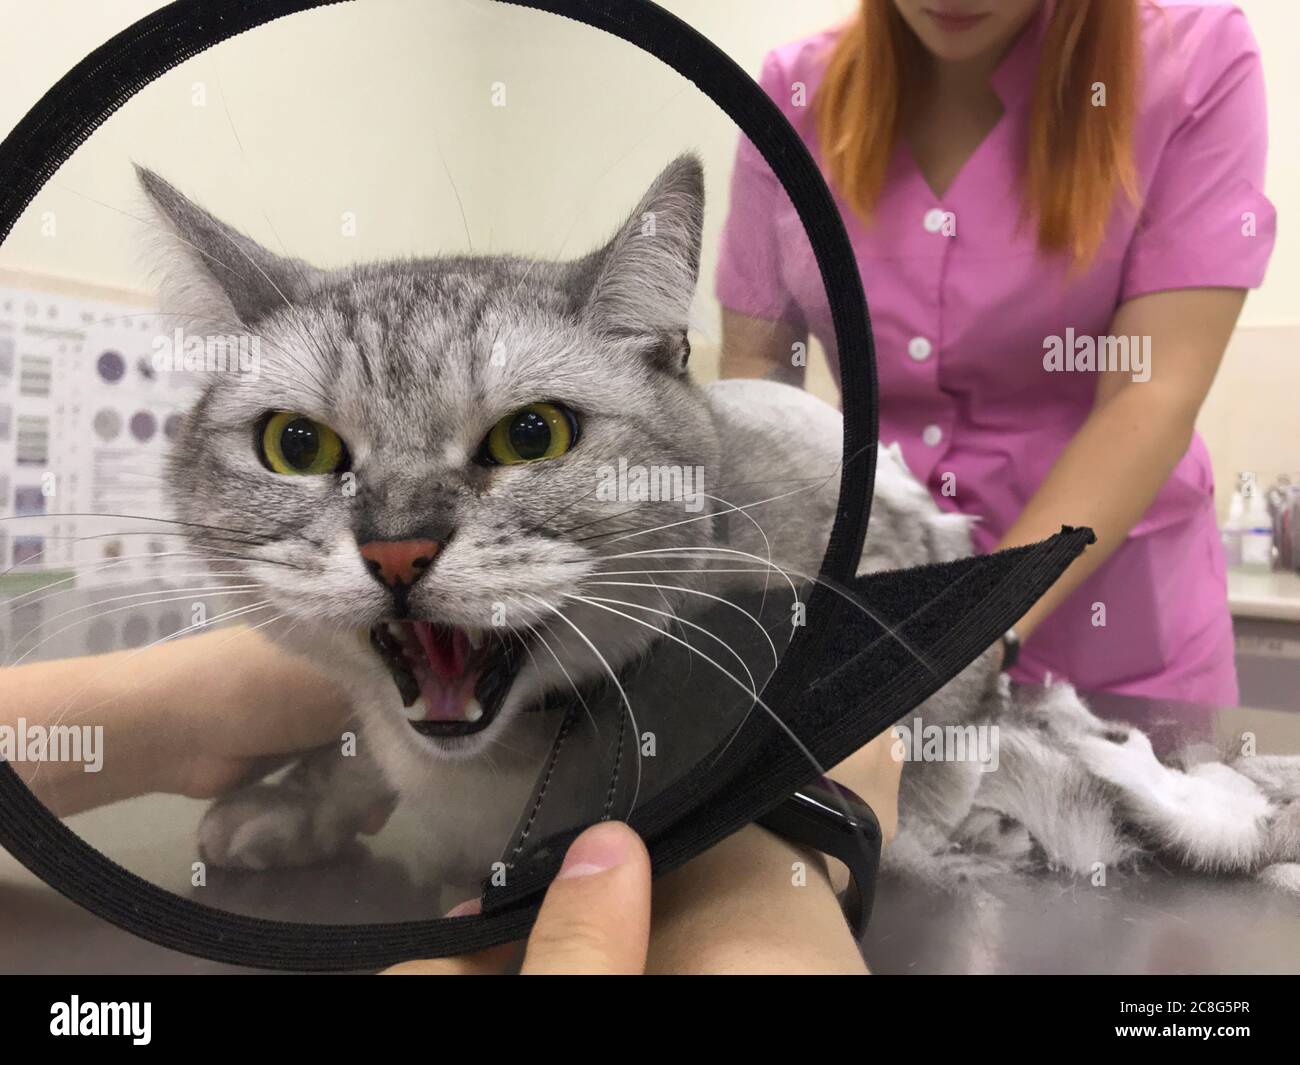 31,951 Angry Cat Vectors Images, Stock Photos, 3D objects